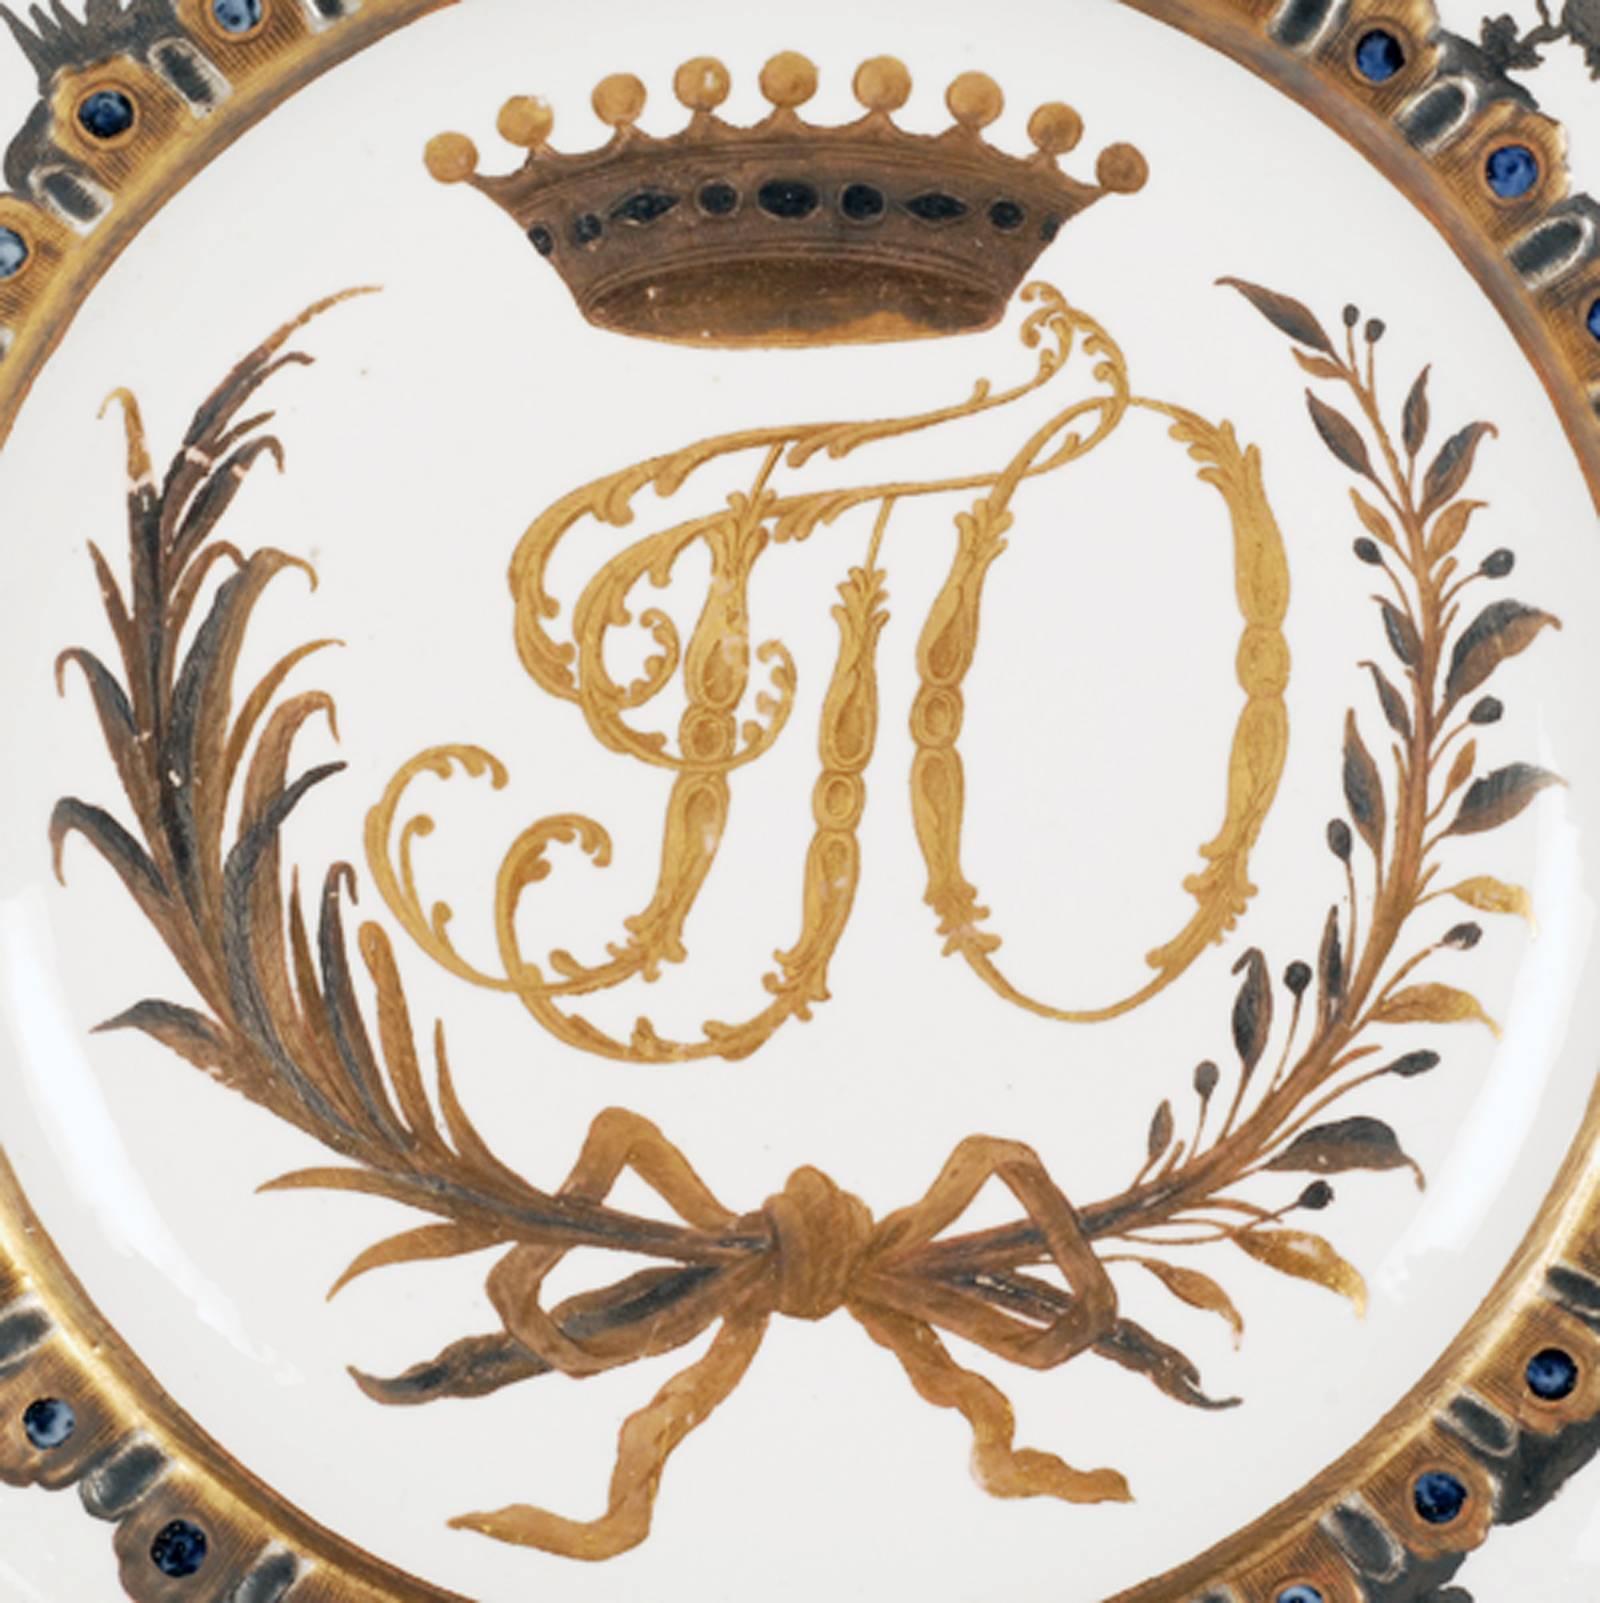 An extremely rare Russian porcelain plate from the Orlov Service, Imperial Porcelain Factory, circa 1763-1770. Circular with shaped border, the cavetto decorated with interlaced and crowned gilt Cyrillic monogram GGO beneath a nine-pointed Count’s